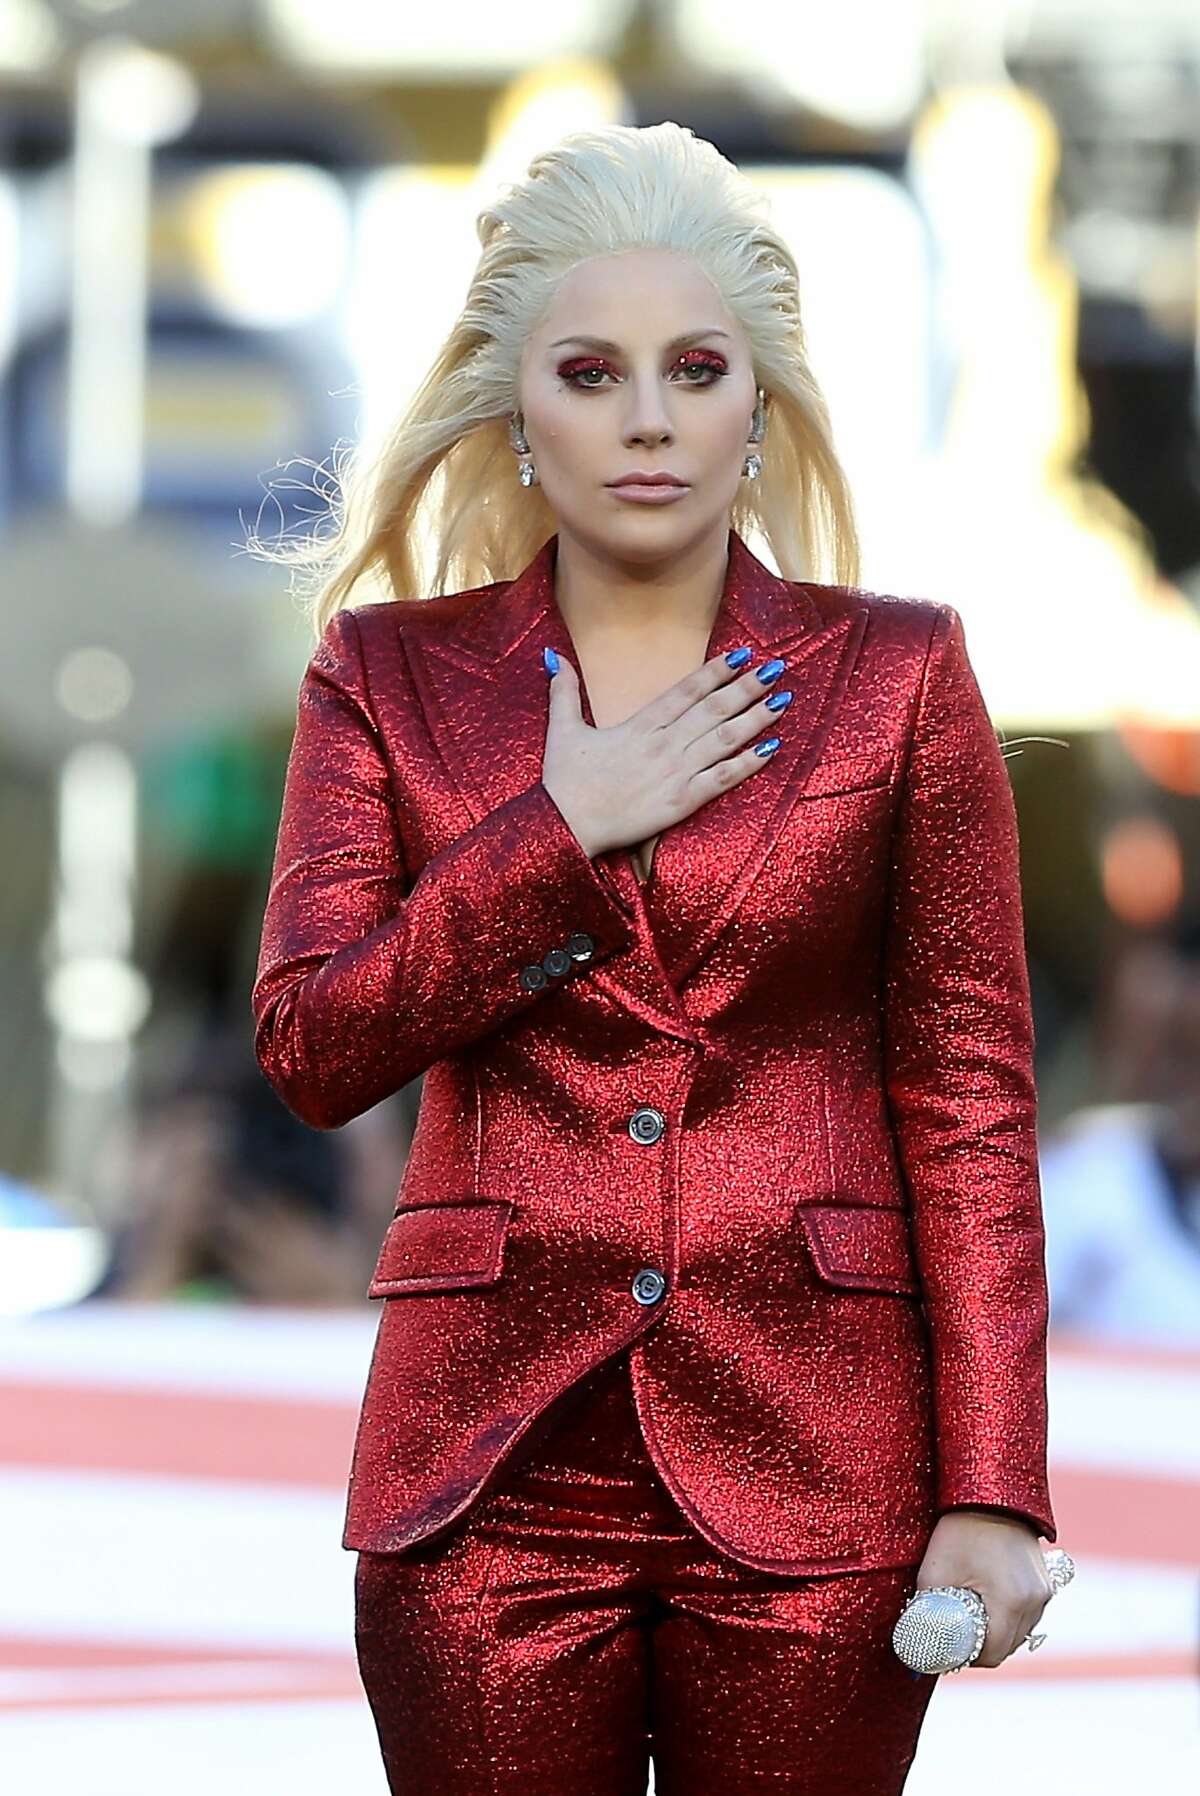 Recording artist Lady Gaga performs the national anthem prior to Super Bowl 50 between the Denver Broncos and the Carolina Panthers at Levi's Stadium on February 7, 2016 in Santa Clara, California. (Photo by Streeter Lecka/Getty Images)